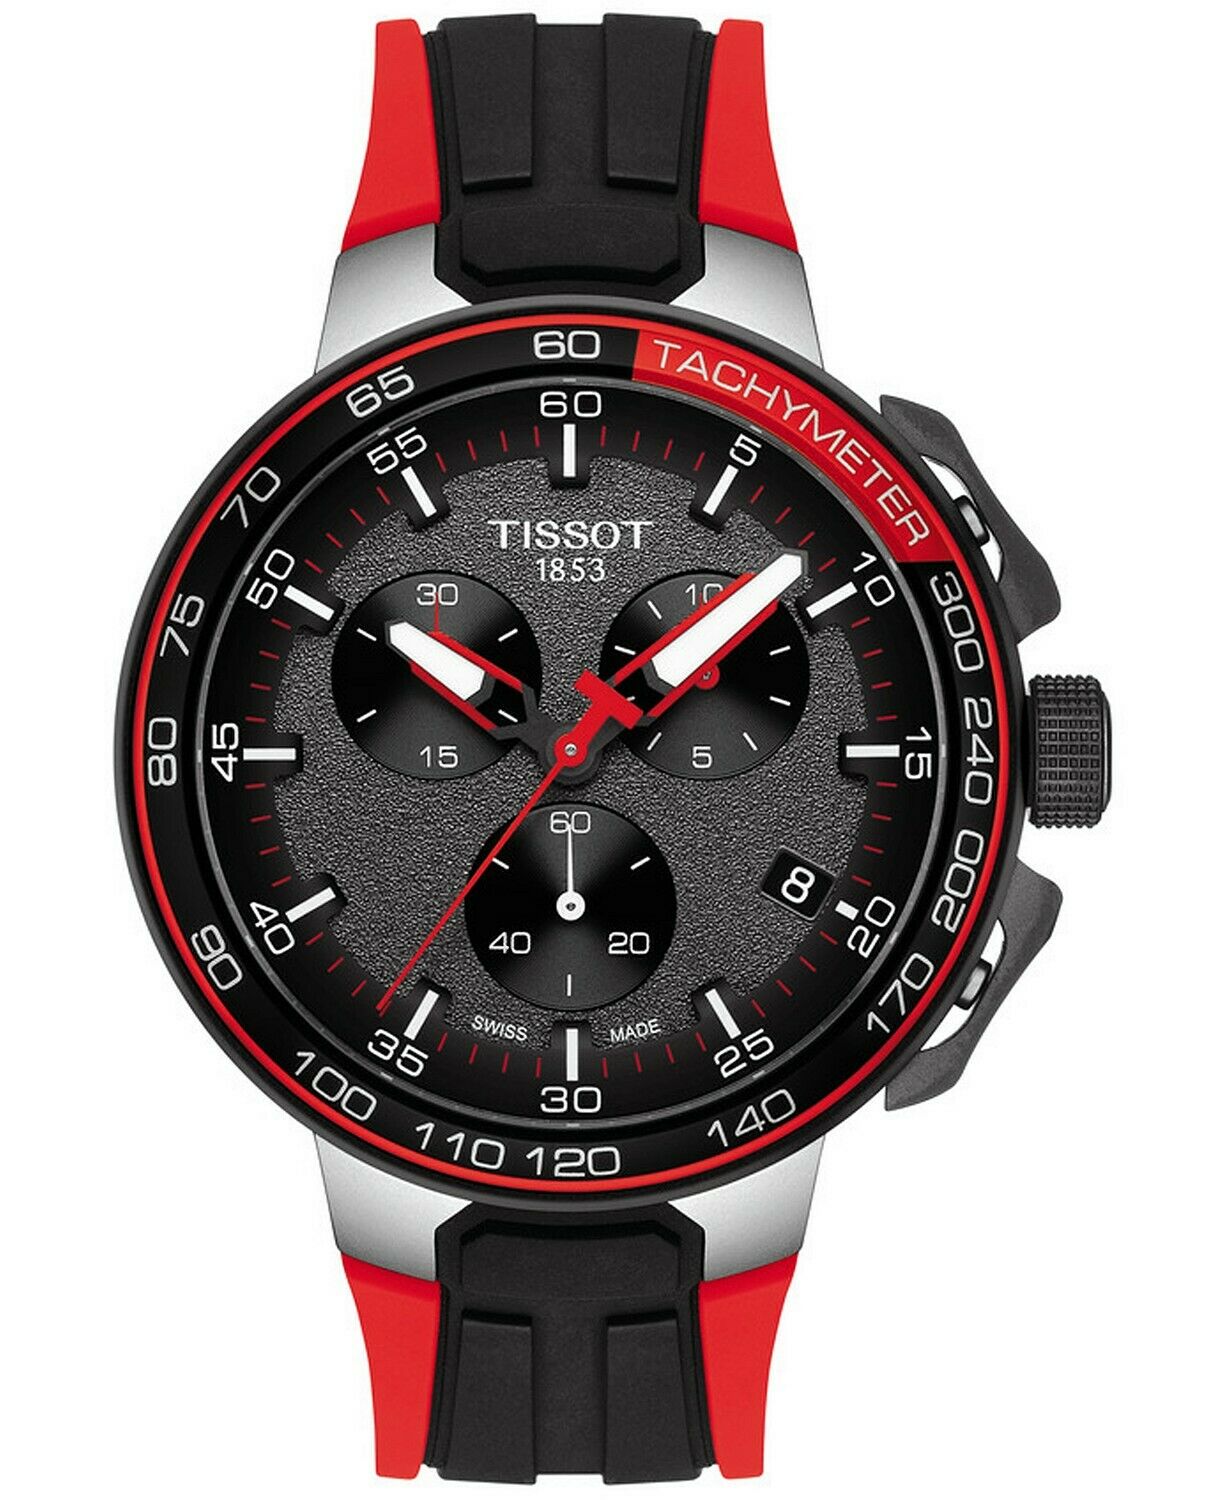 Tissot T Race Cycling Chronograph T111 417 27 441 00 Market Price Watchcharts